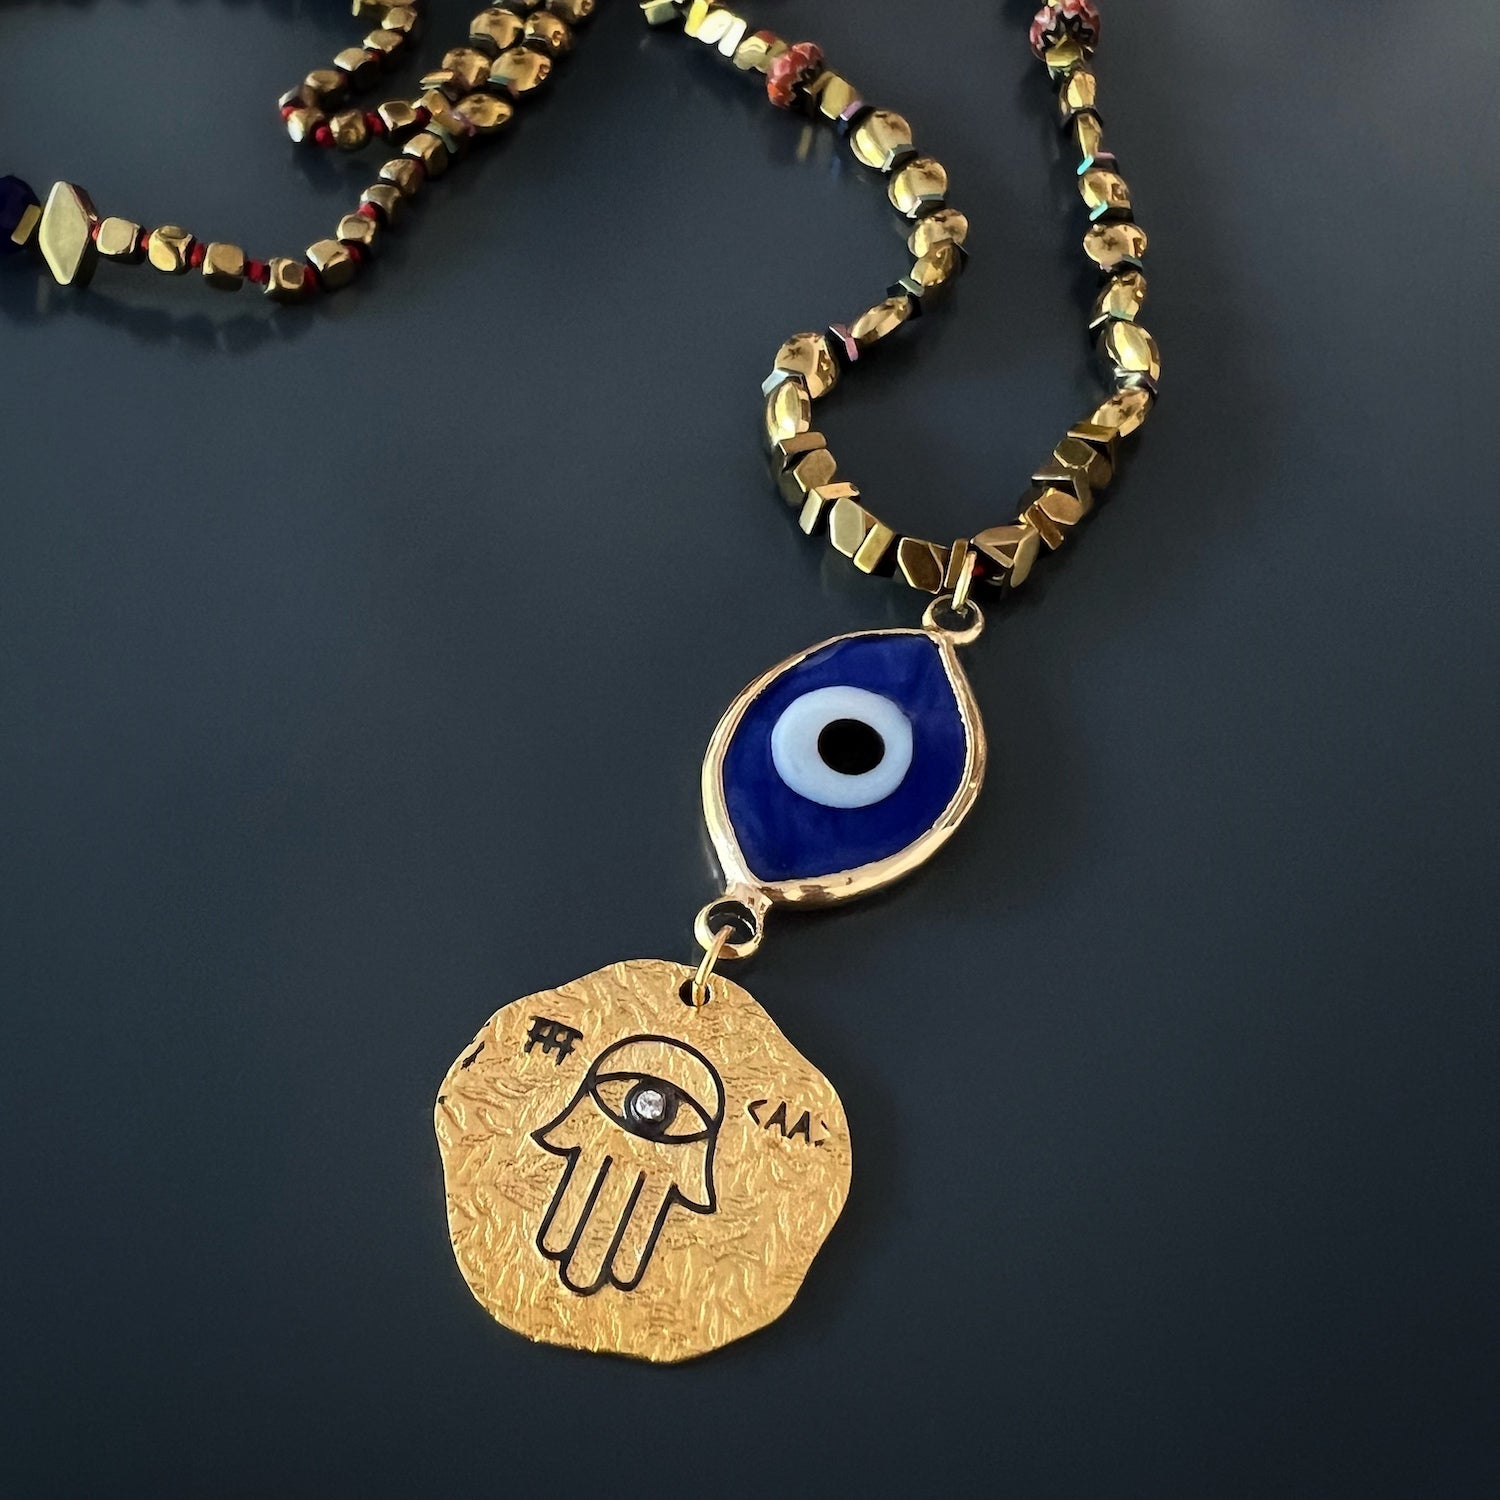 Hamsa and Evil Eye Pendant Close-Up - A close-up view of the sterling silver Hamsa pendant and the 18k gold-plated evil eye glass pendant, revealing the intricate details and craftsmanship of these powerful symbols.